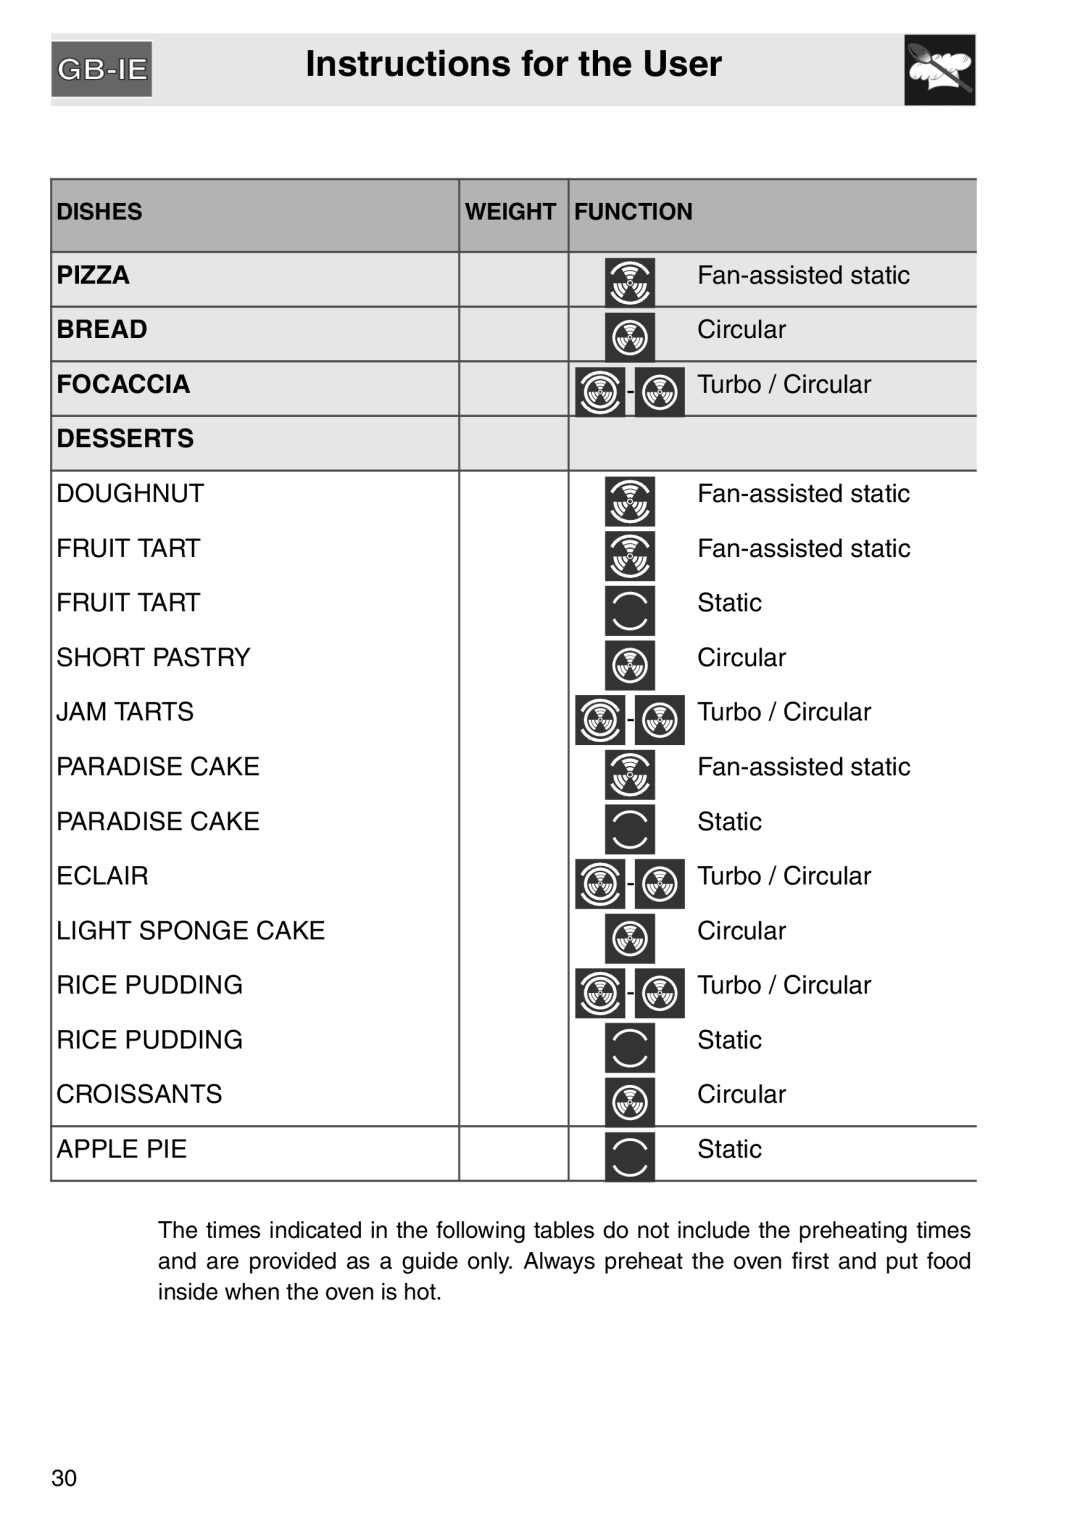 Smeg SA561X-9 installation instructions Pizza, Bread, Focaccia, Desserts, Instructions for the User 